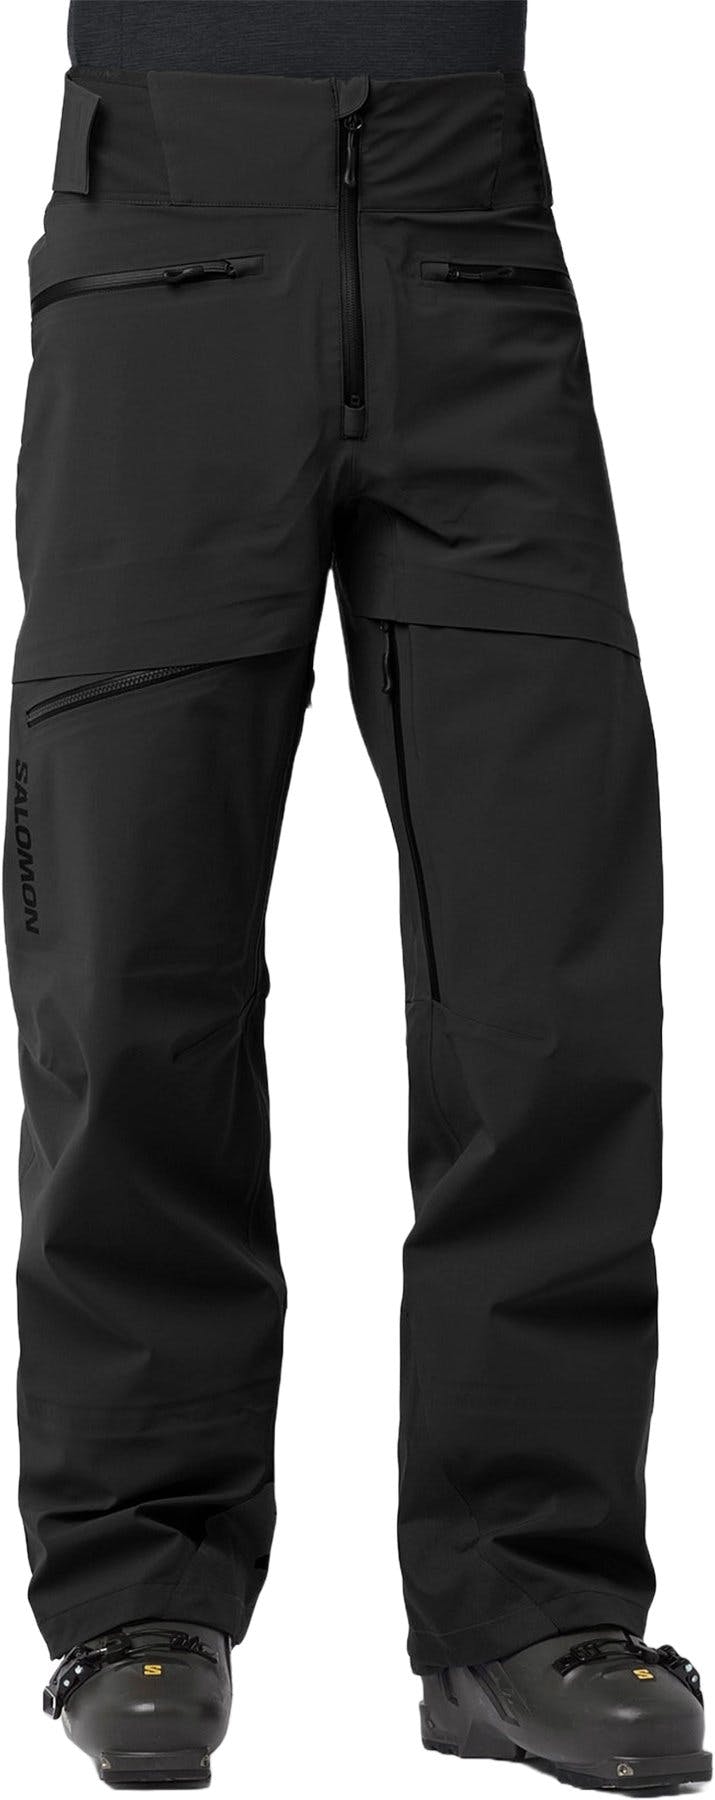 Product image for Force 3 Layer Pants - Men's